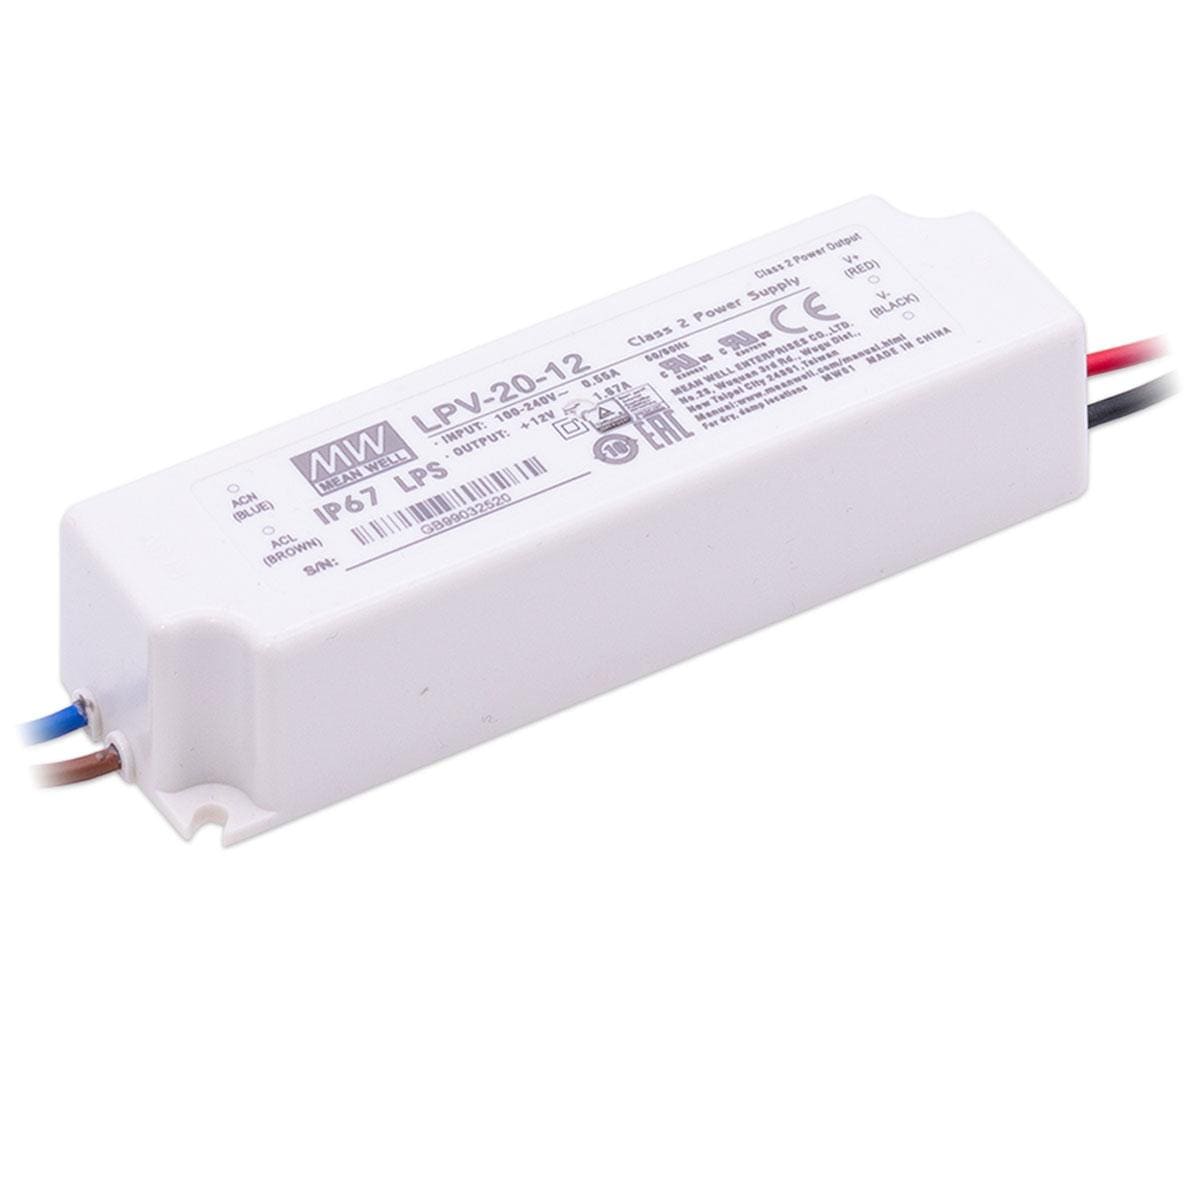 LED Netzteil Mean Well LPV 20W 12V 1.67A IP67